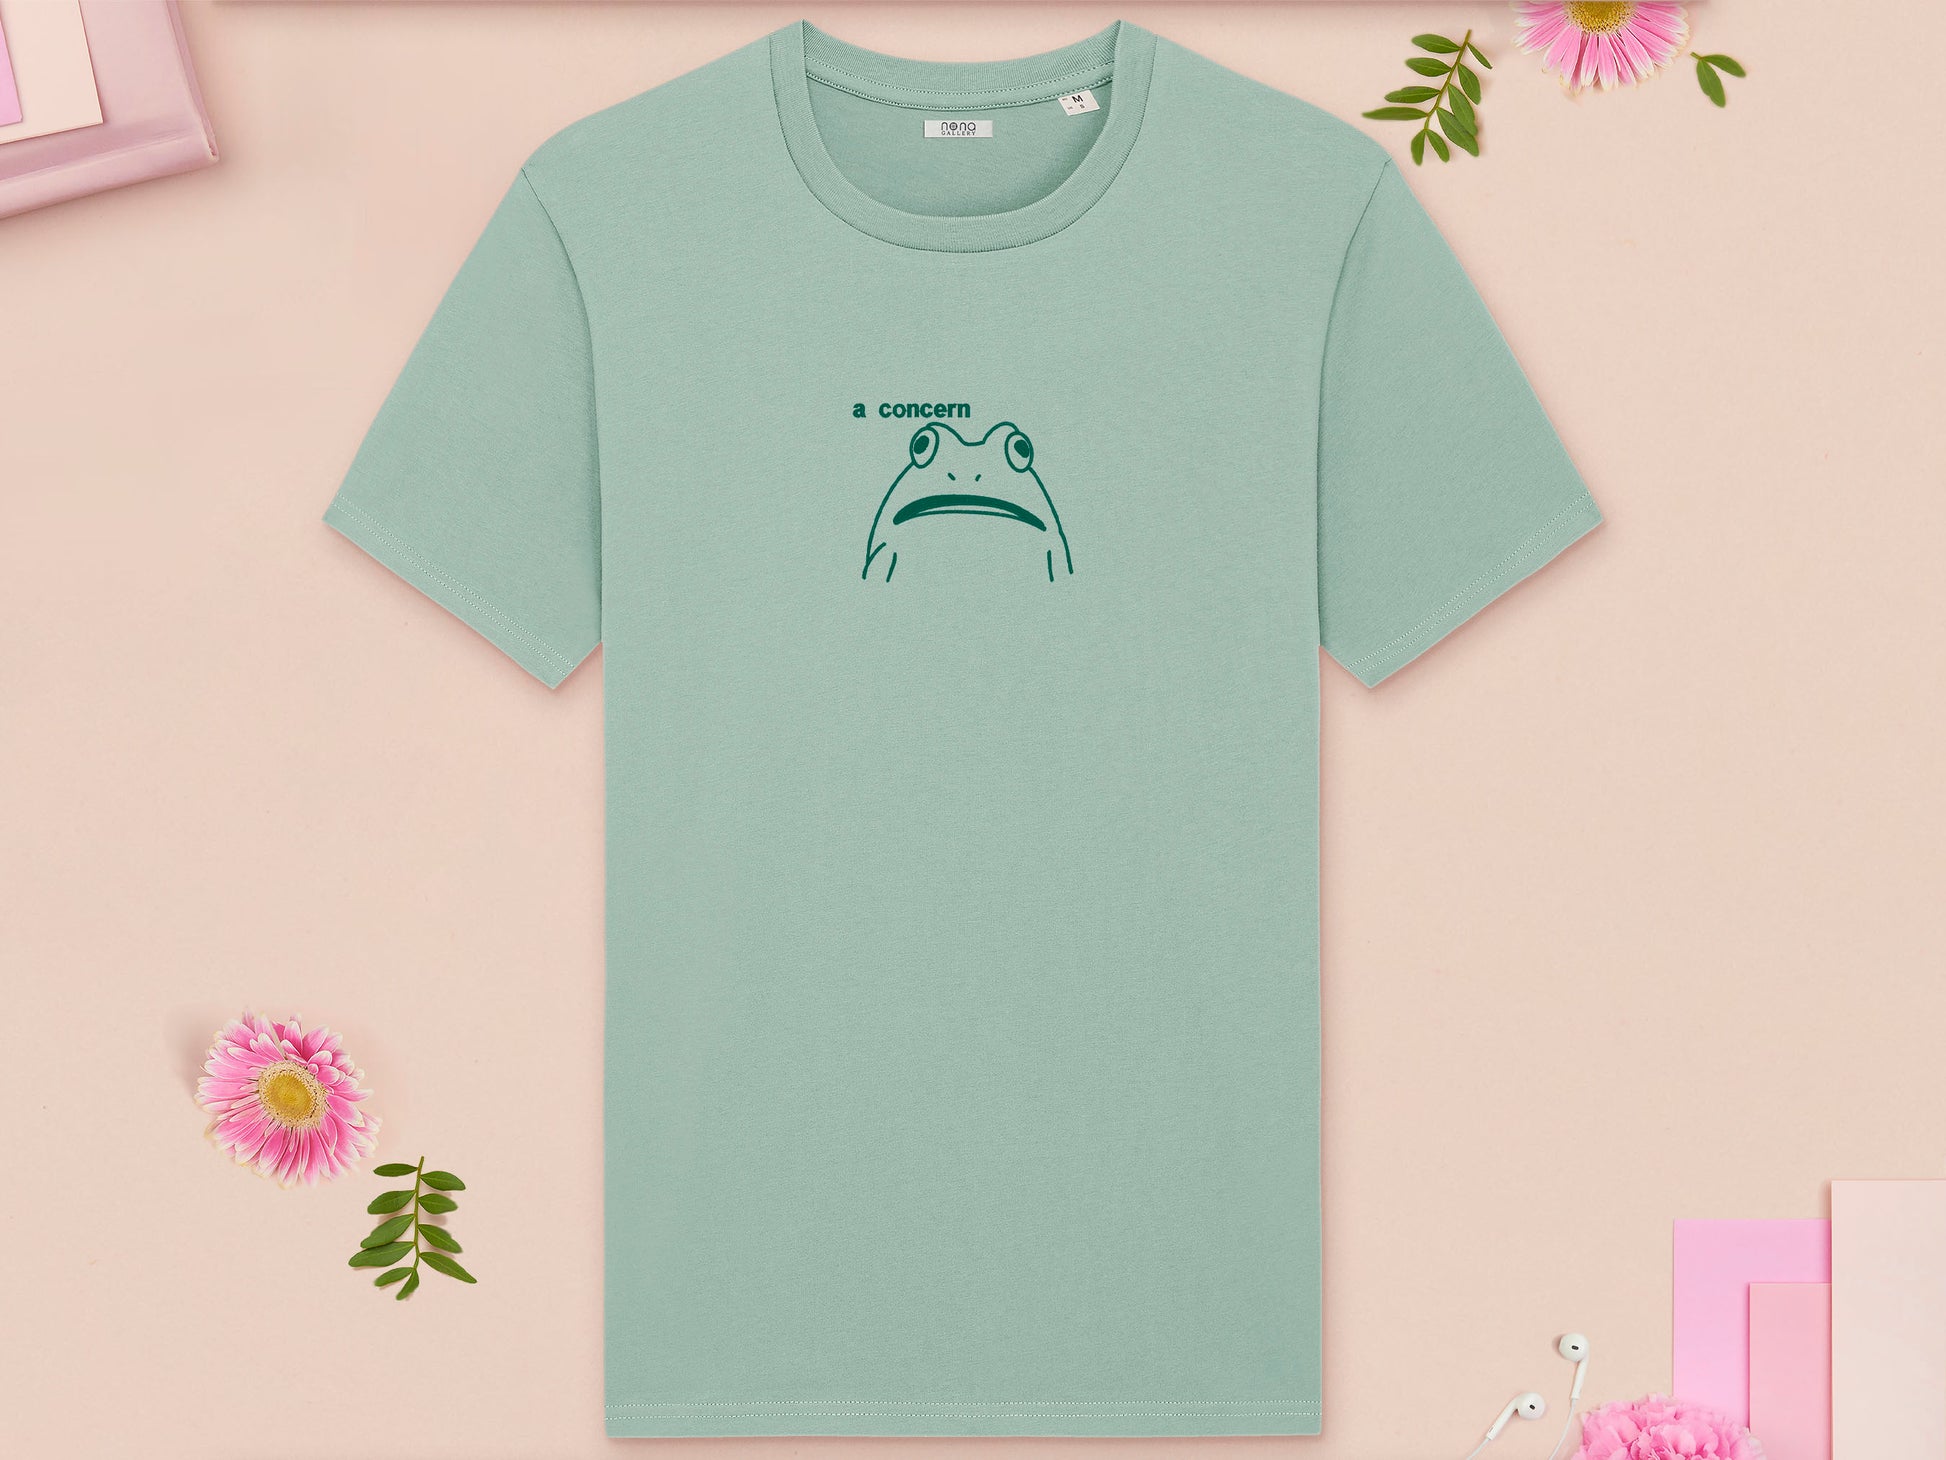 A green crew neck short sleeve t-shirt, with an embroidered green thread design of cute confused looking frog with the text a concern.